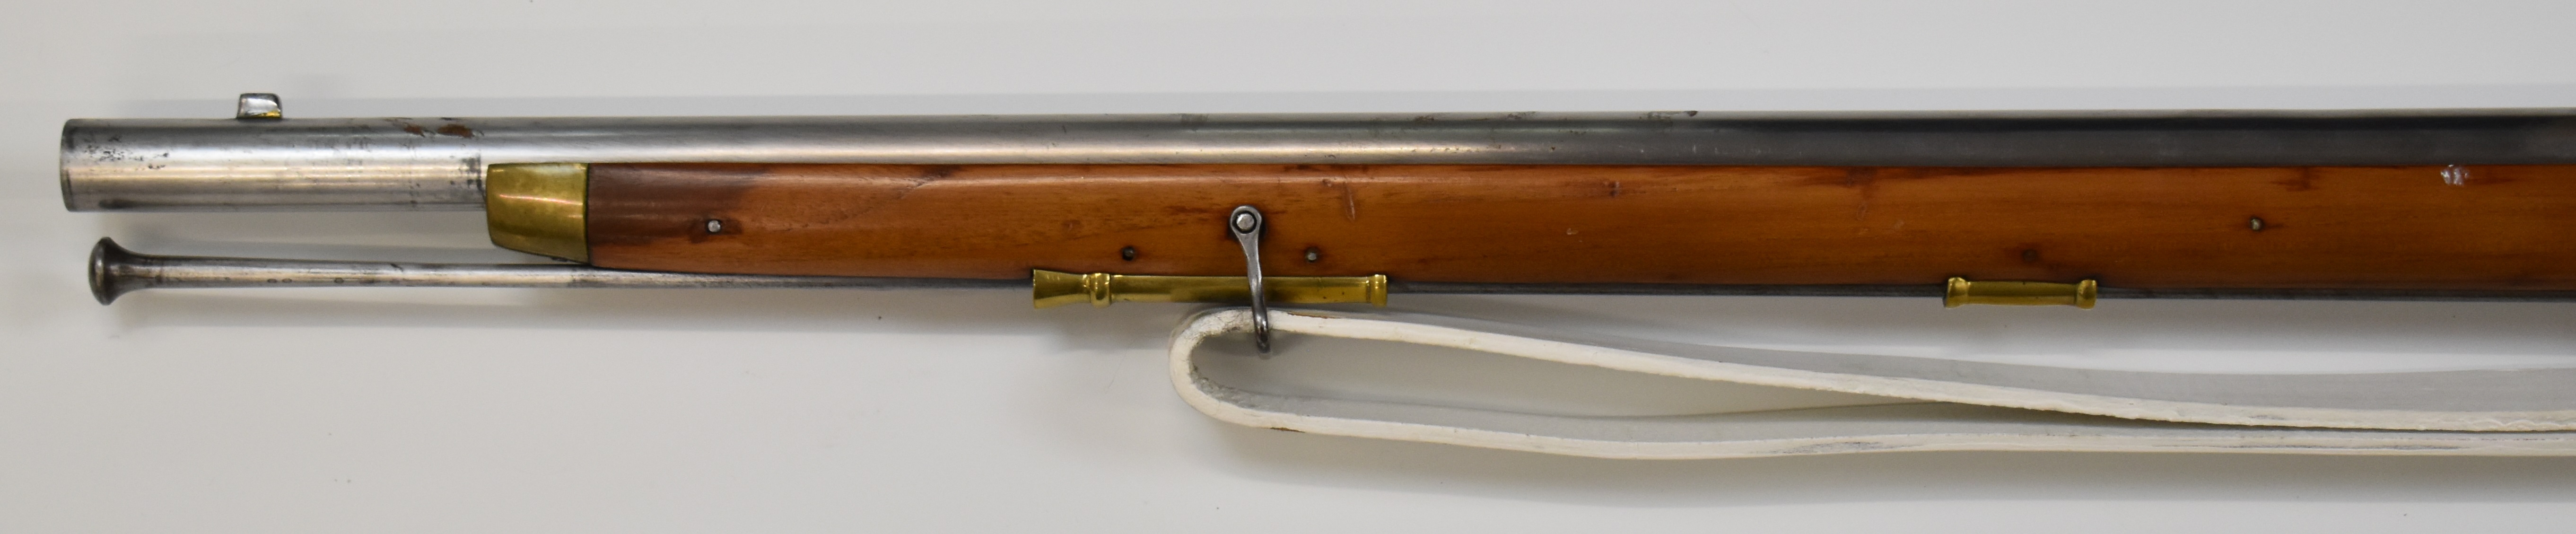 British Brown Bess flintlock musket with 'Tower' and crown over 'GR' cypher to the lock, brass - Image 10 of 10